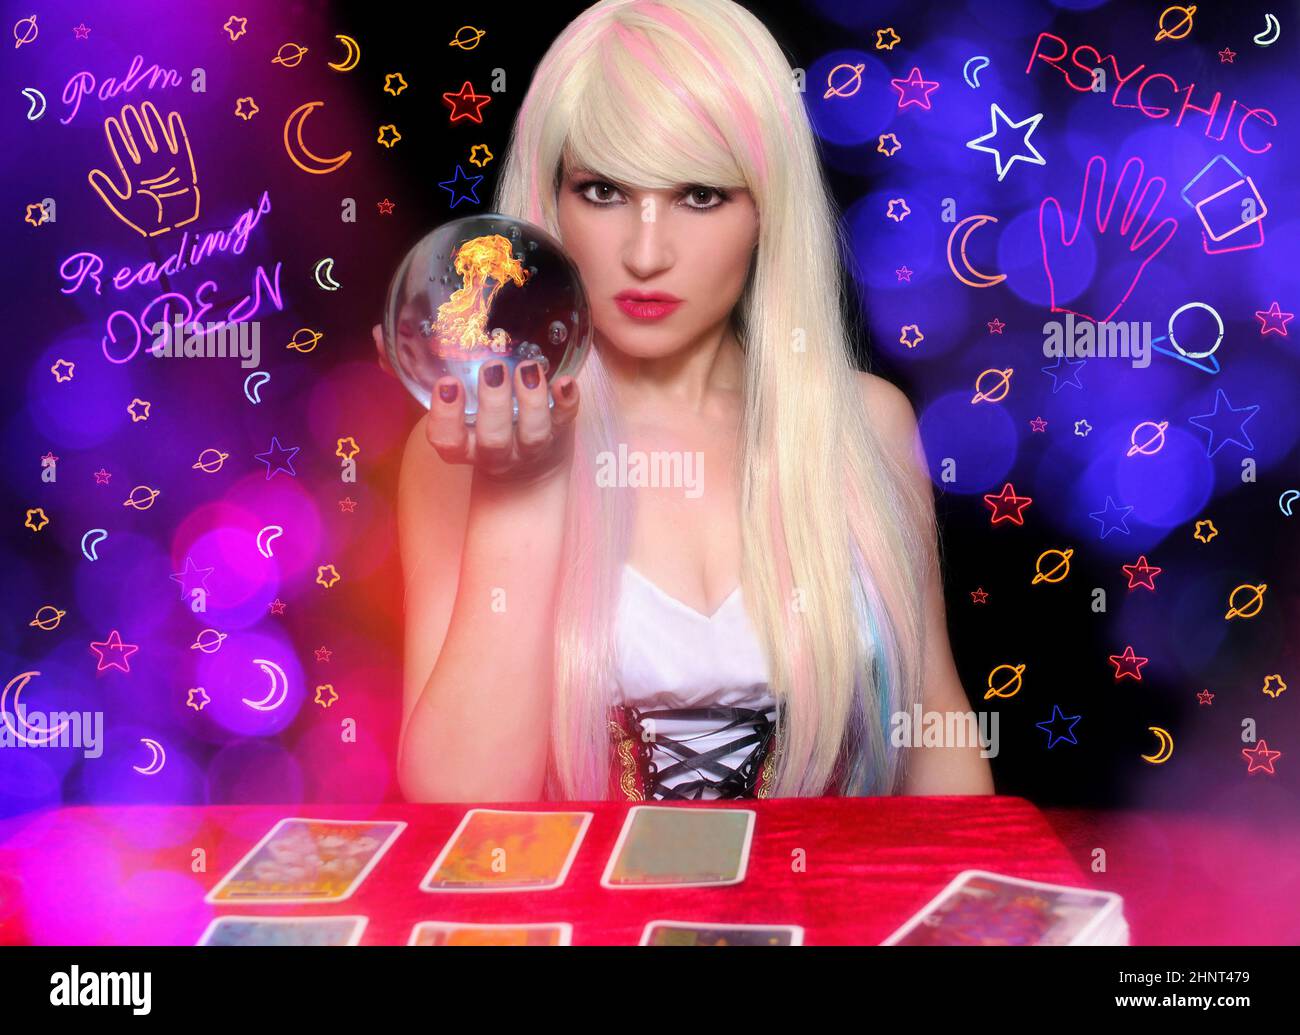 Psychic with Blond hair and Crystal Ball. Neon Lights in background Stock Photo